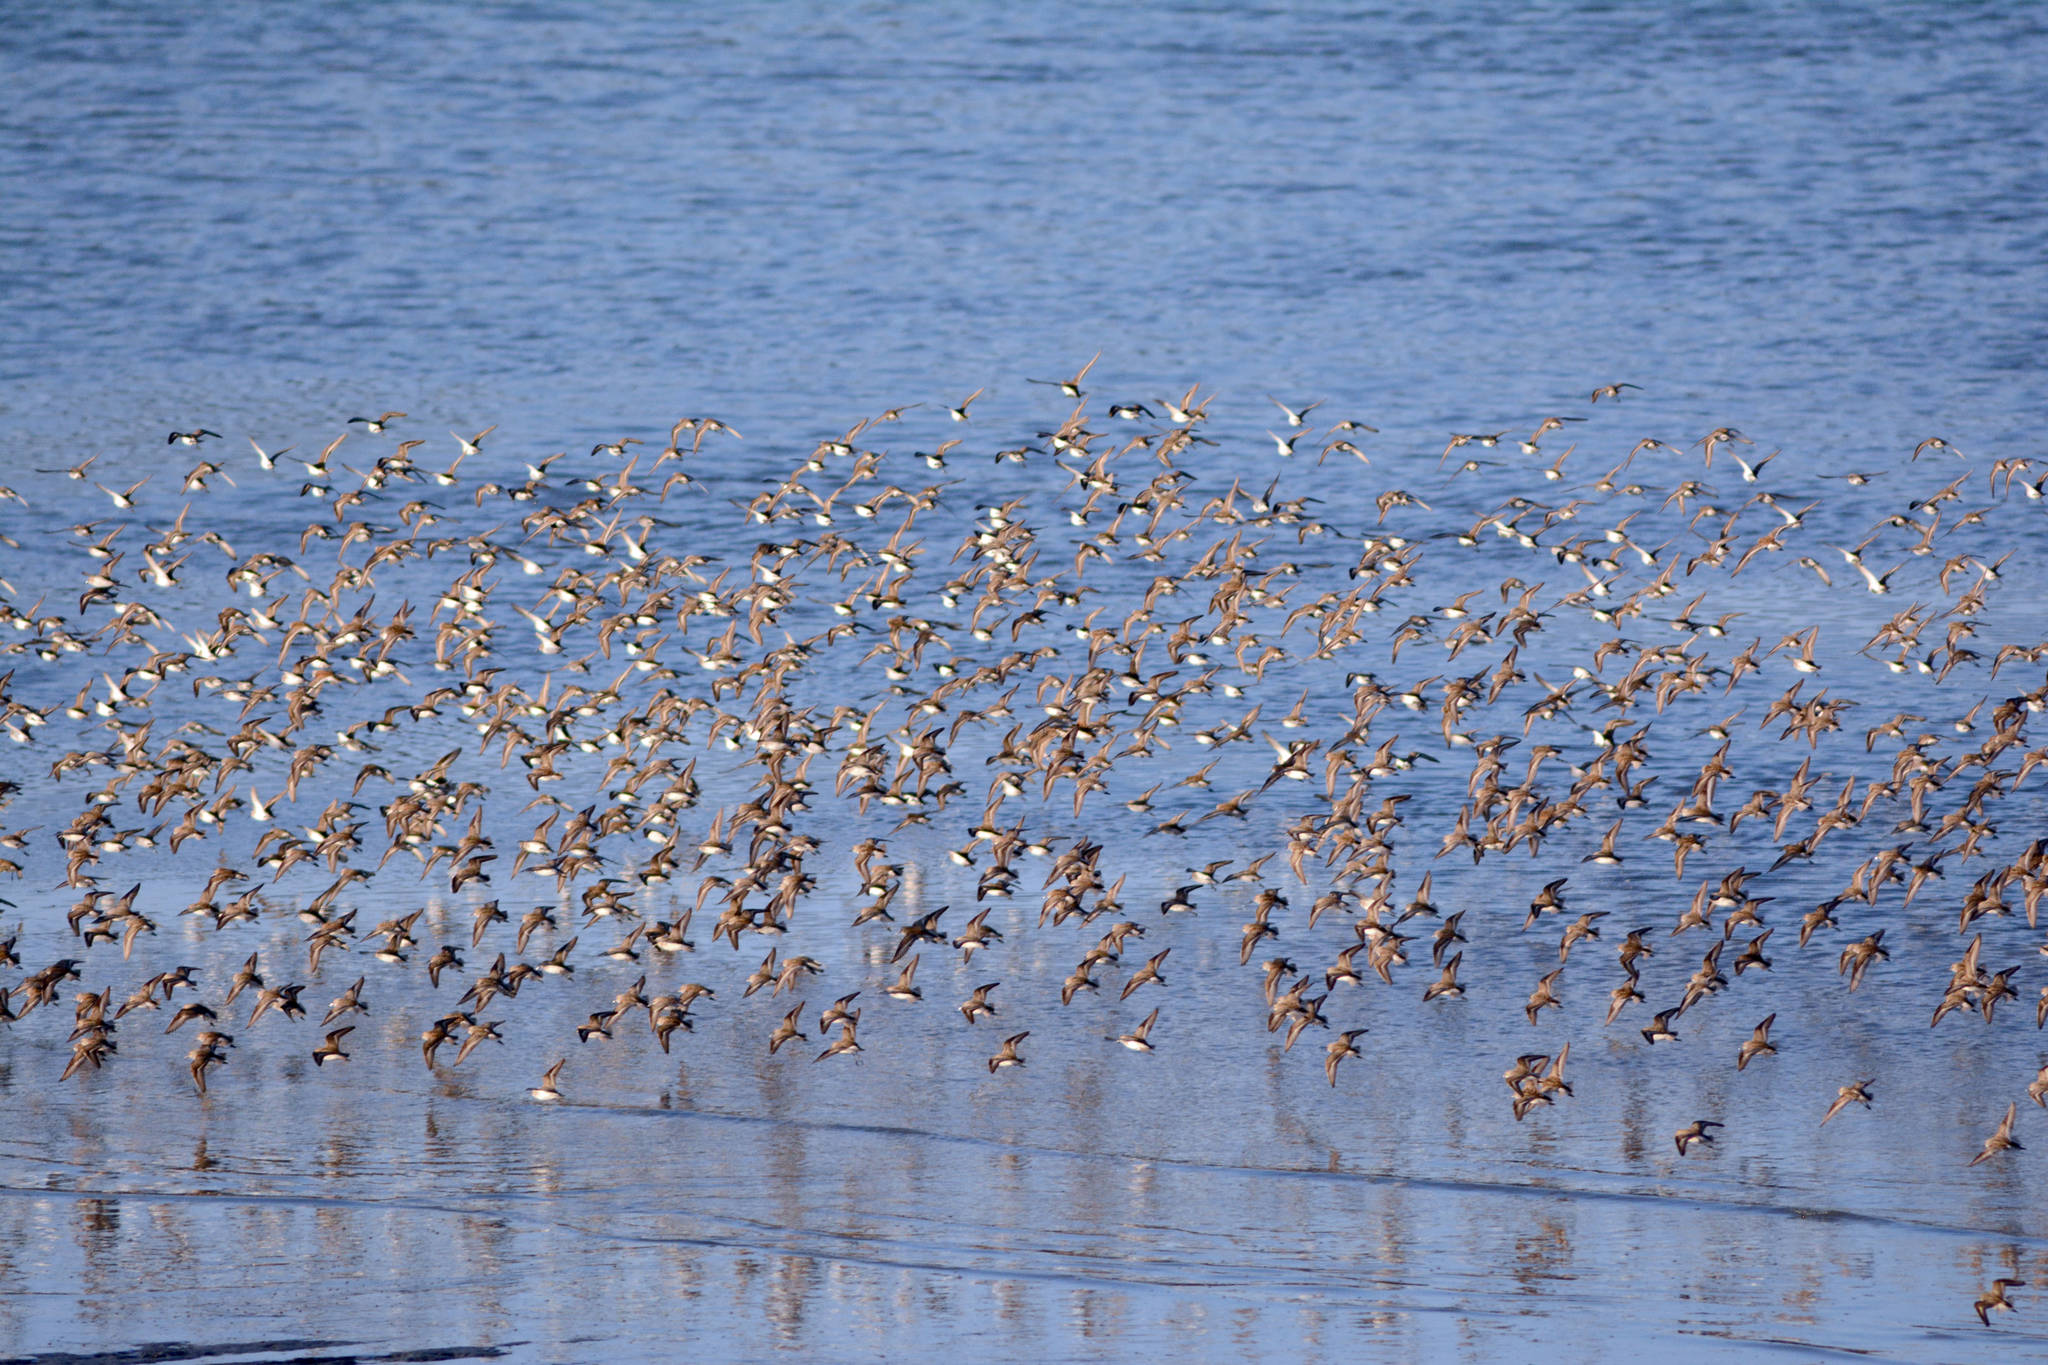 Western sandpipers, dunlins and maybe a few least sandpipers feed in Mud Bay on Tuesday, May 7, 2018 in Homer, Alaska. A pulse of about 8,000 sandpipers flew in Tuesday night.